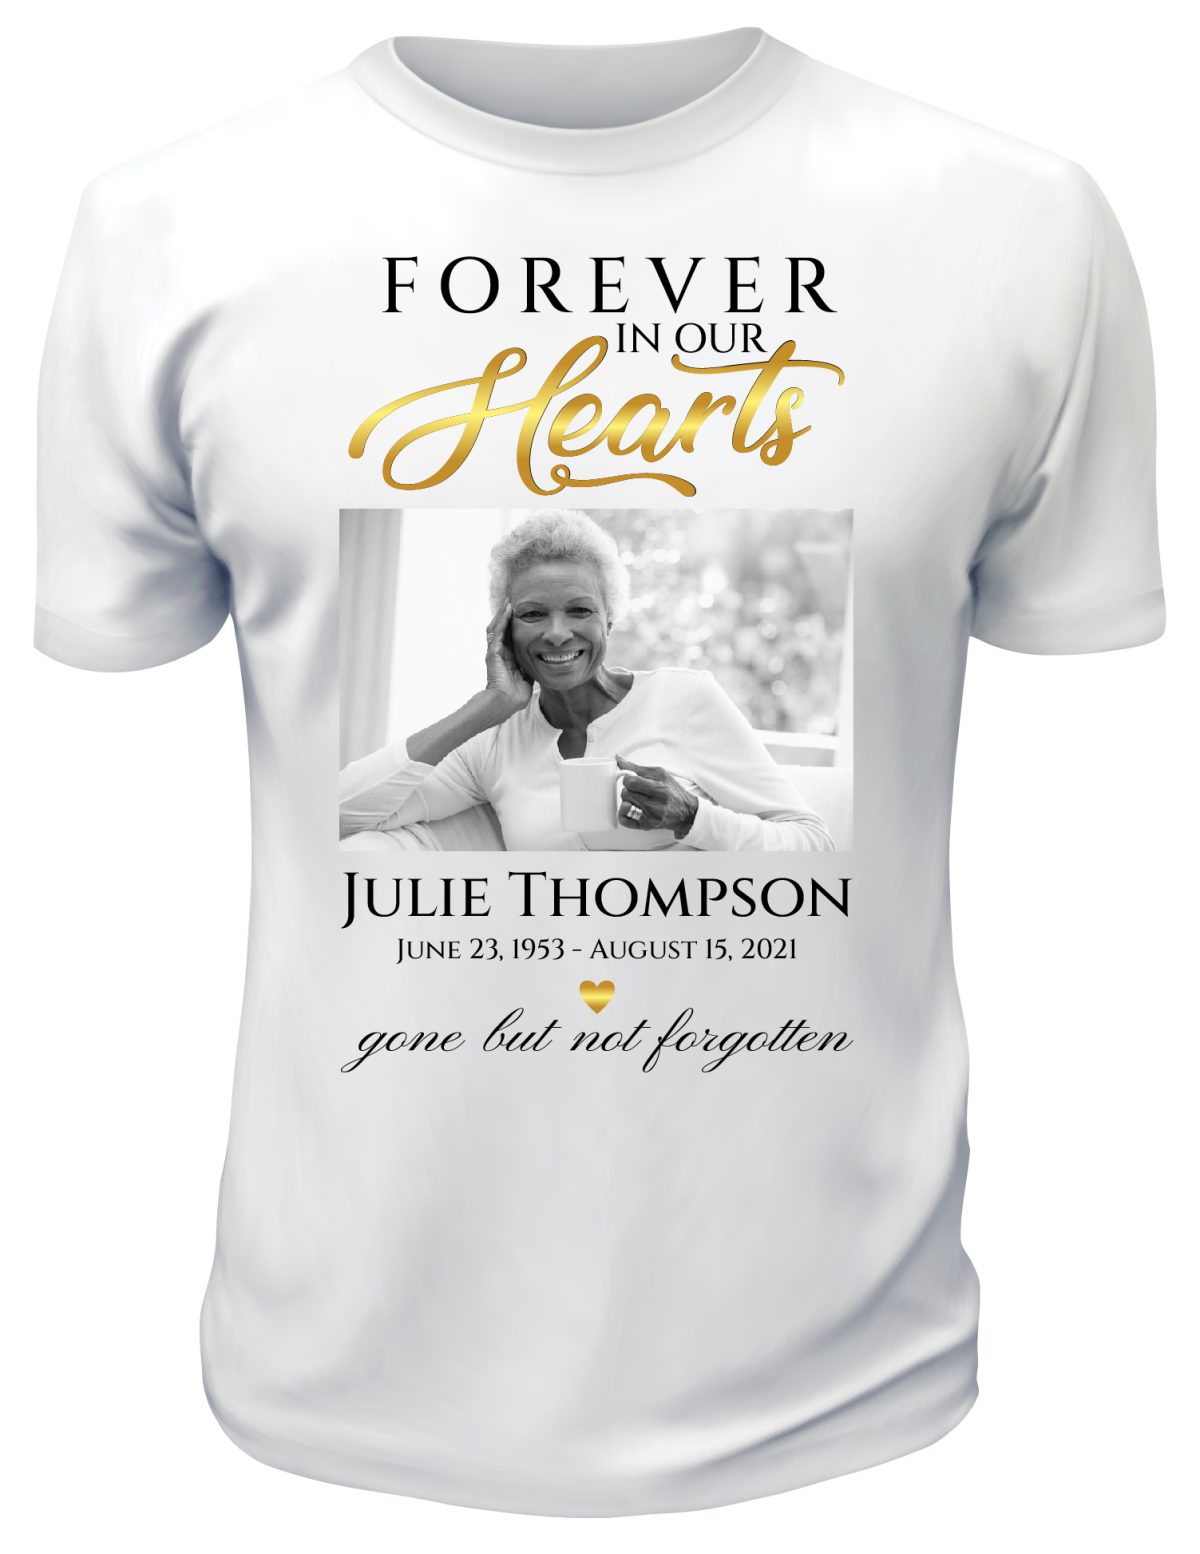 Forever in our hearts shirt memorial t-shirt